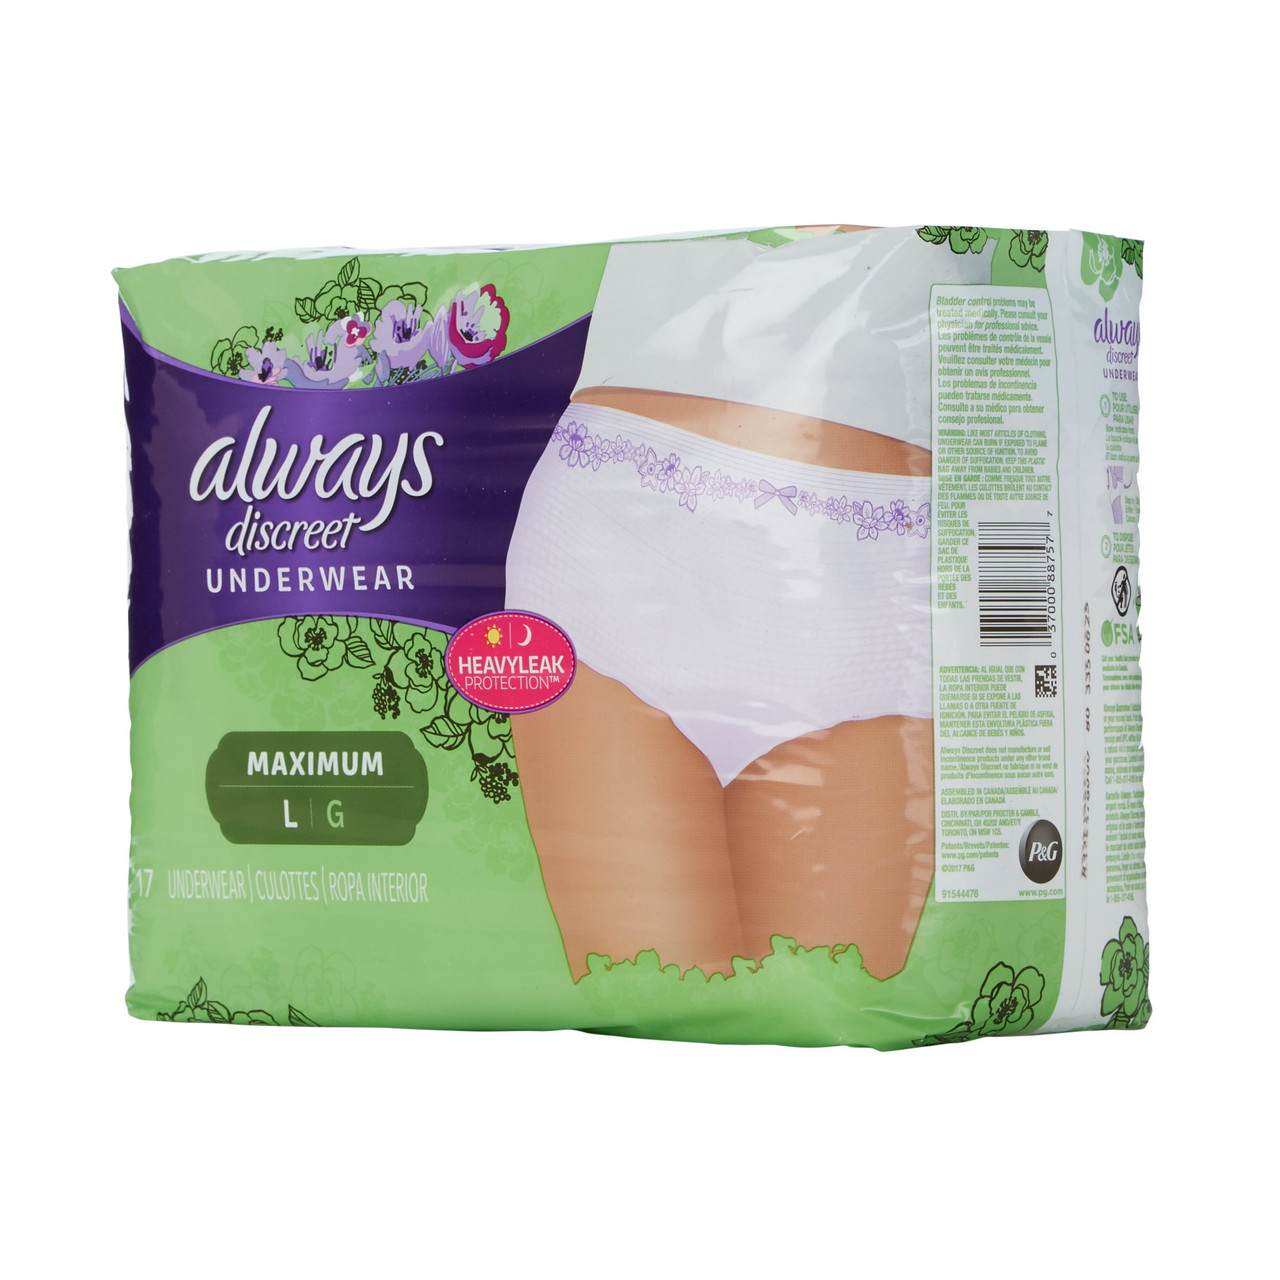 Prevail Women's Daily Incontinence Underwear, Maximum Absorbency - Size  Medium